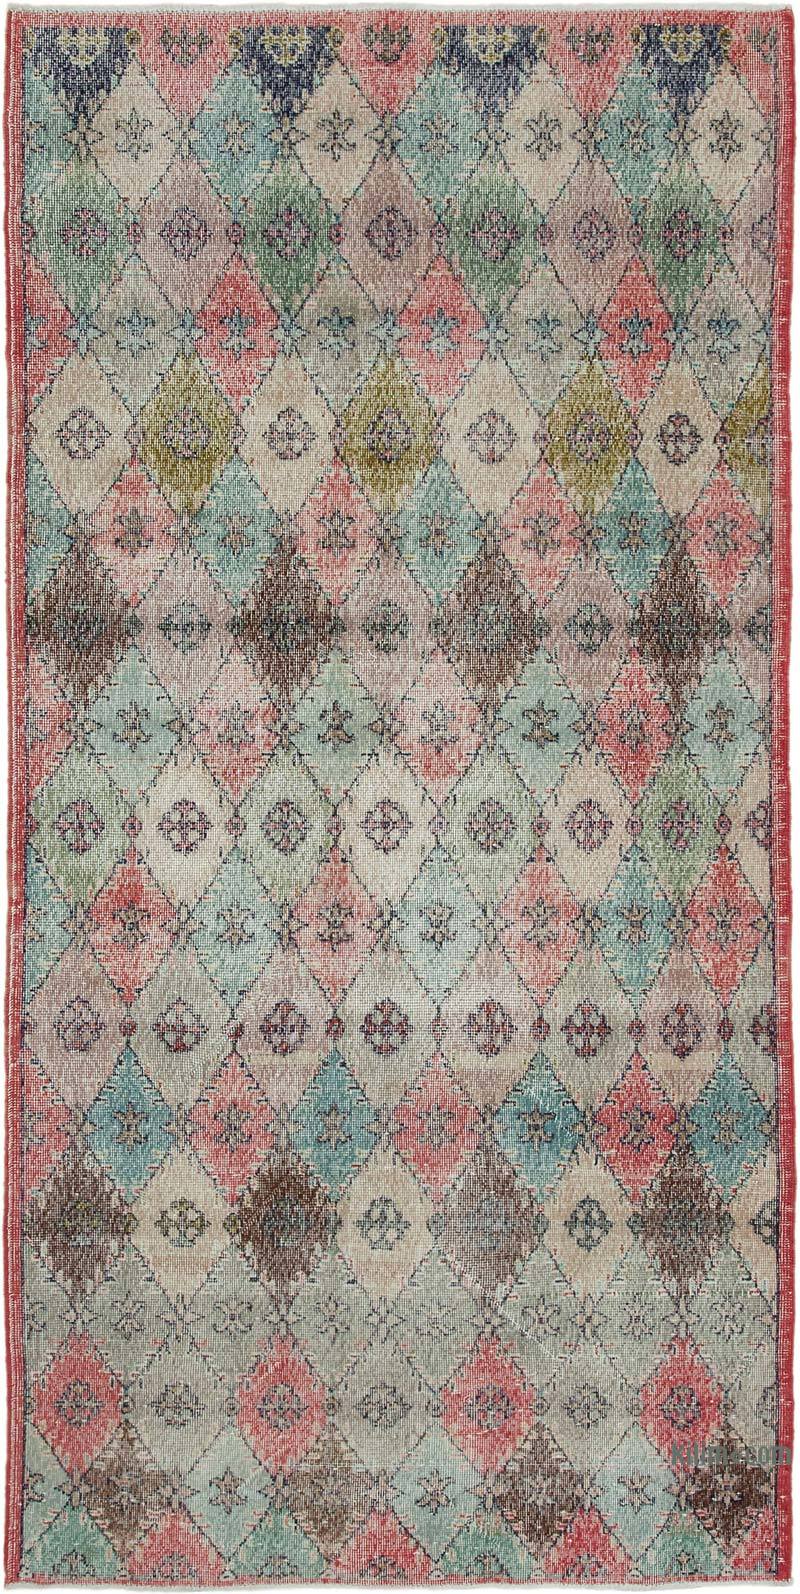 Retro Vintage Turkish Hand-Knotted Rug - 4' 5" x 8' 11" (53 in. x 107 in.) - K0038039